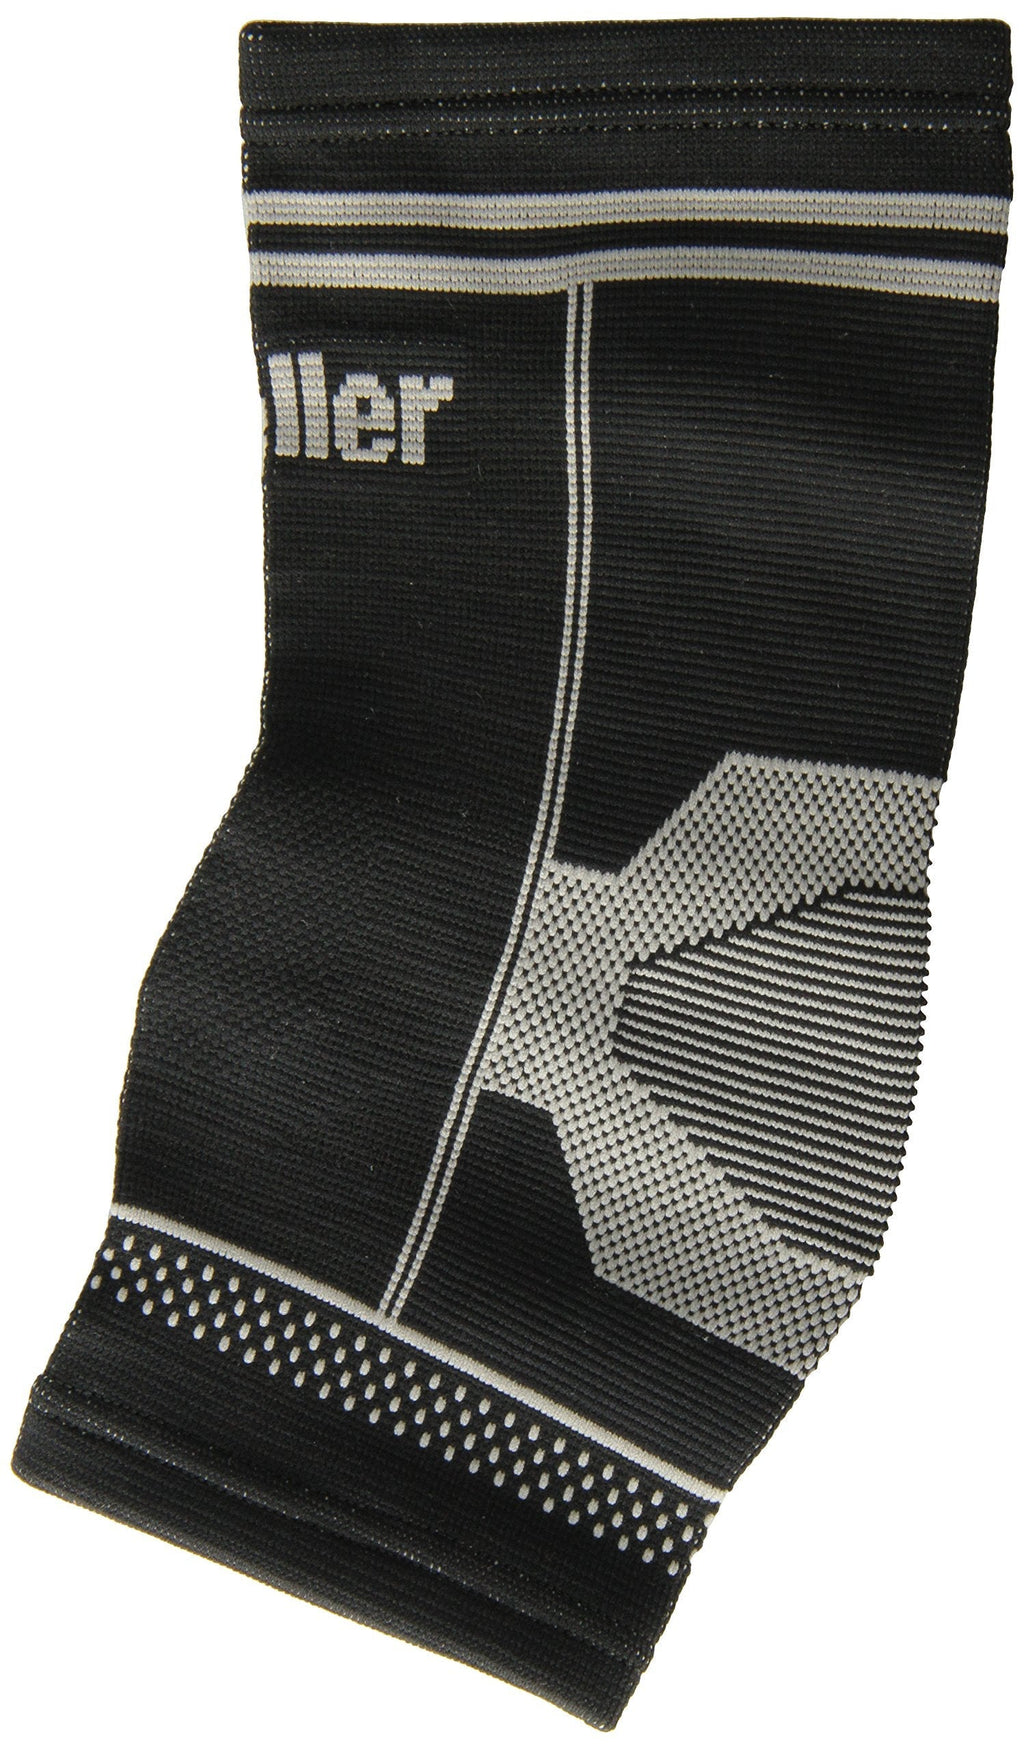 [Australia] - Mueller Sport 4 Way Ankle Support, Large/X large 